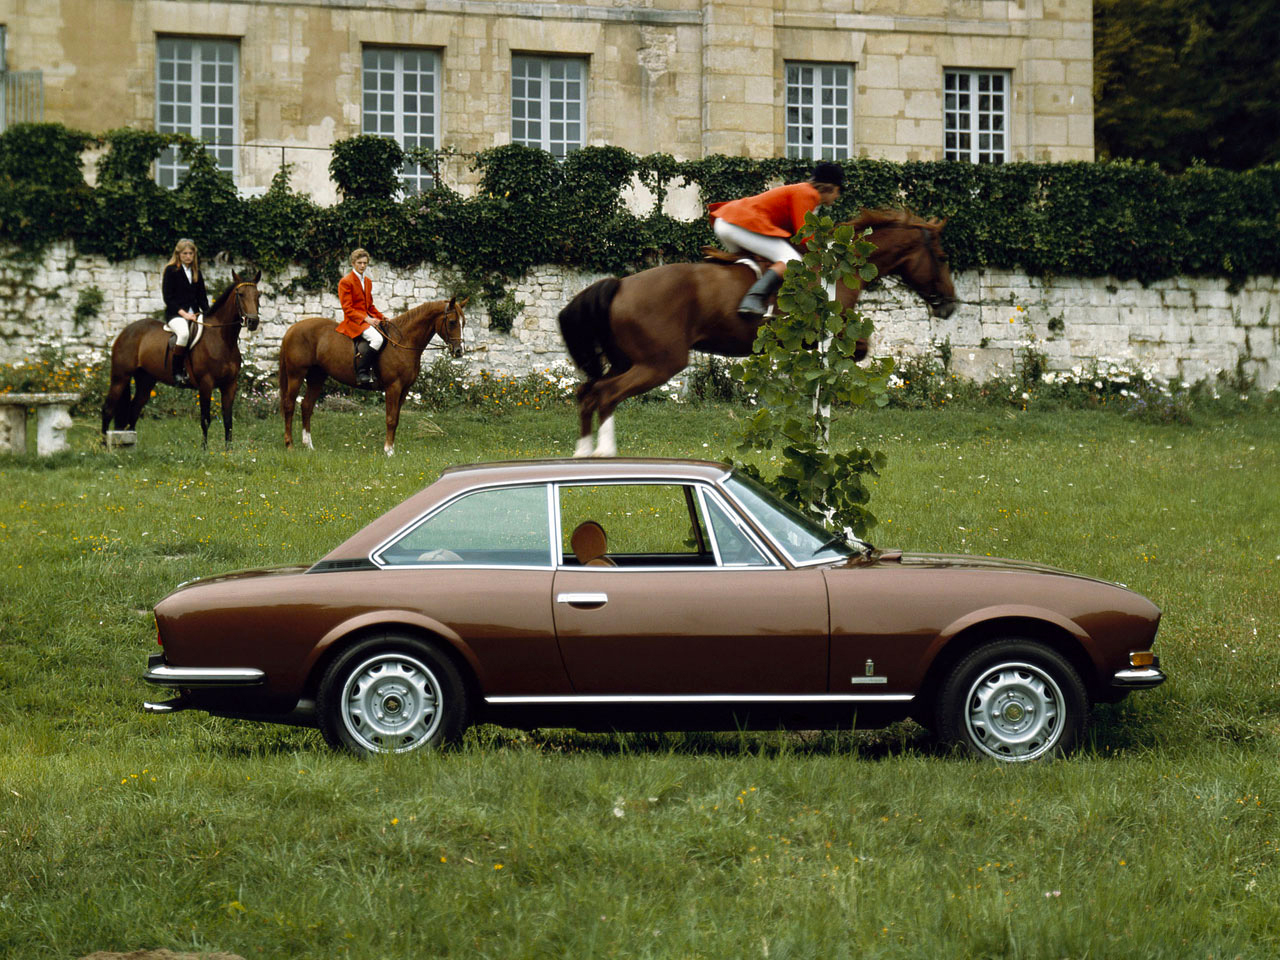 peugeot_504_coupe_1974_4.jpg